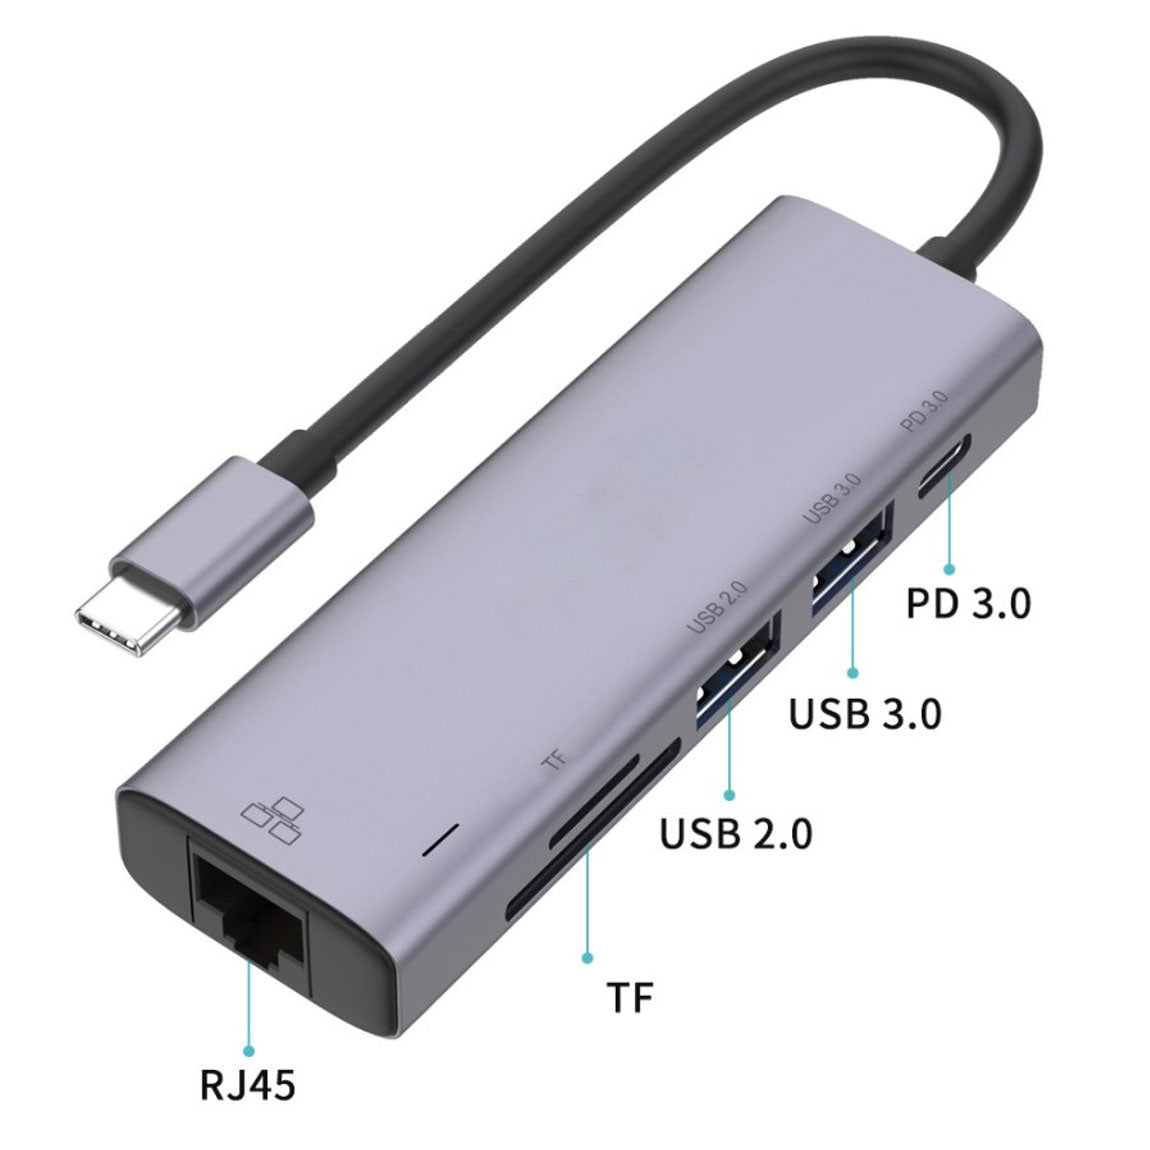  6-in-1 Adapter USB Hub ,   TYPE-C PD Port  Ethernet  USB-C Charger Port  SD/TF Card Reader   RJ45 Network Port   - NWL54 2014-5